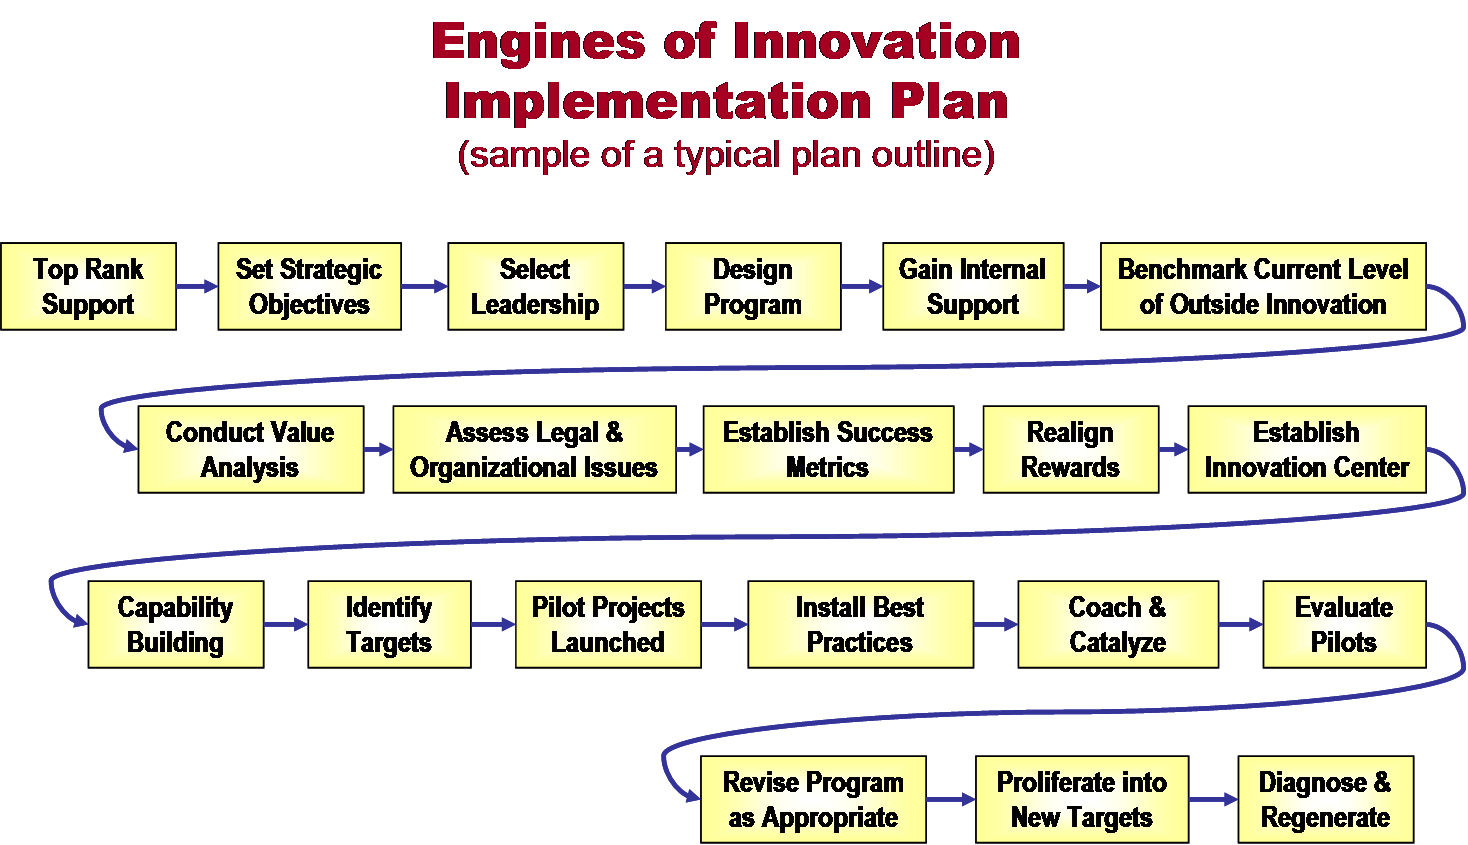 Engines of Innovation Implementation Plan